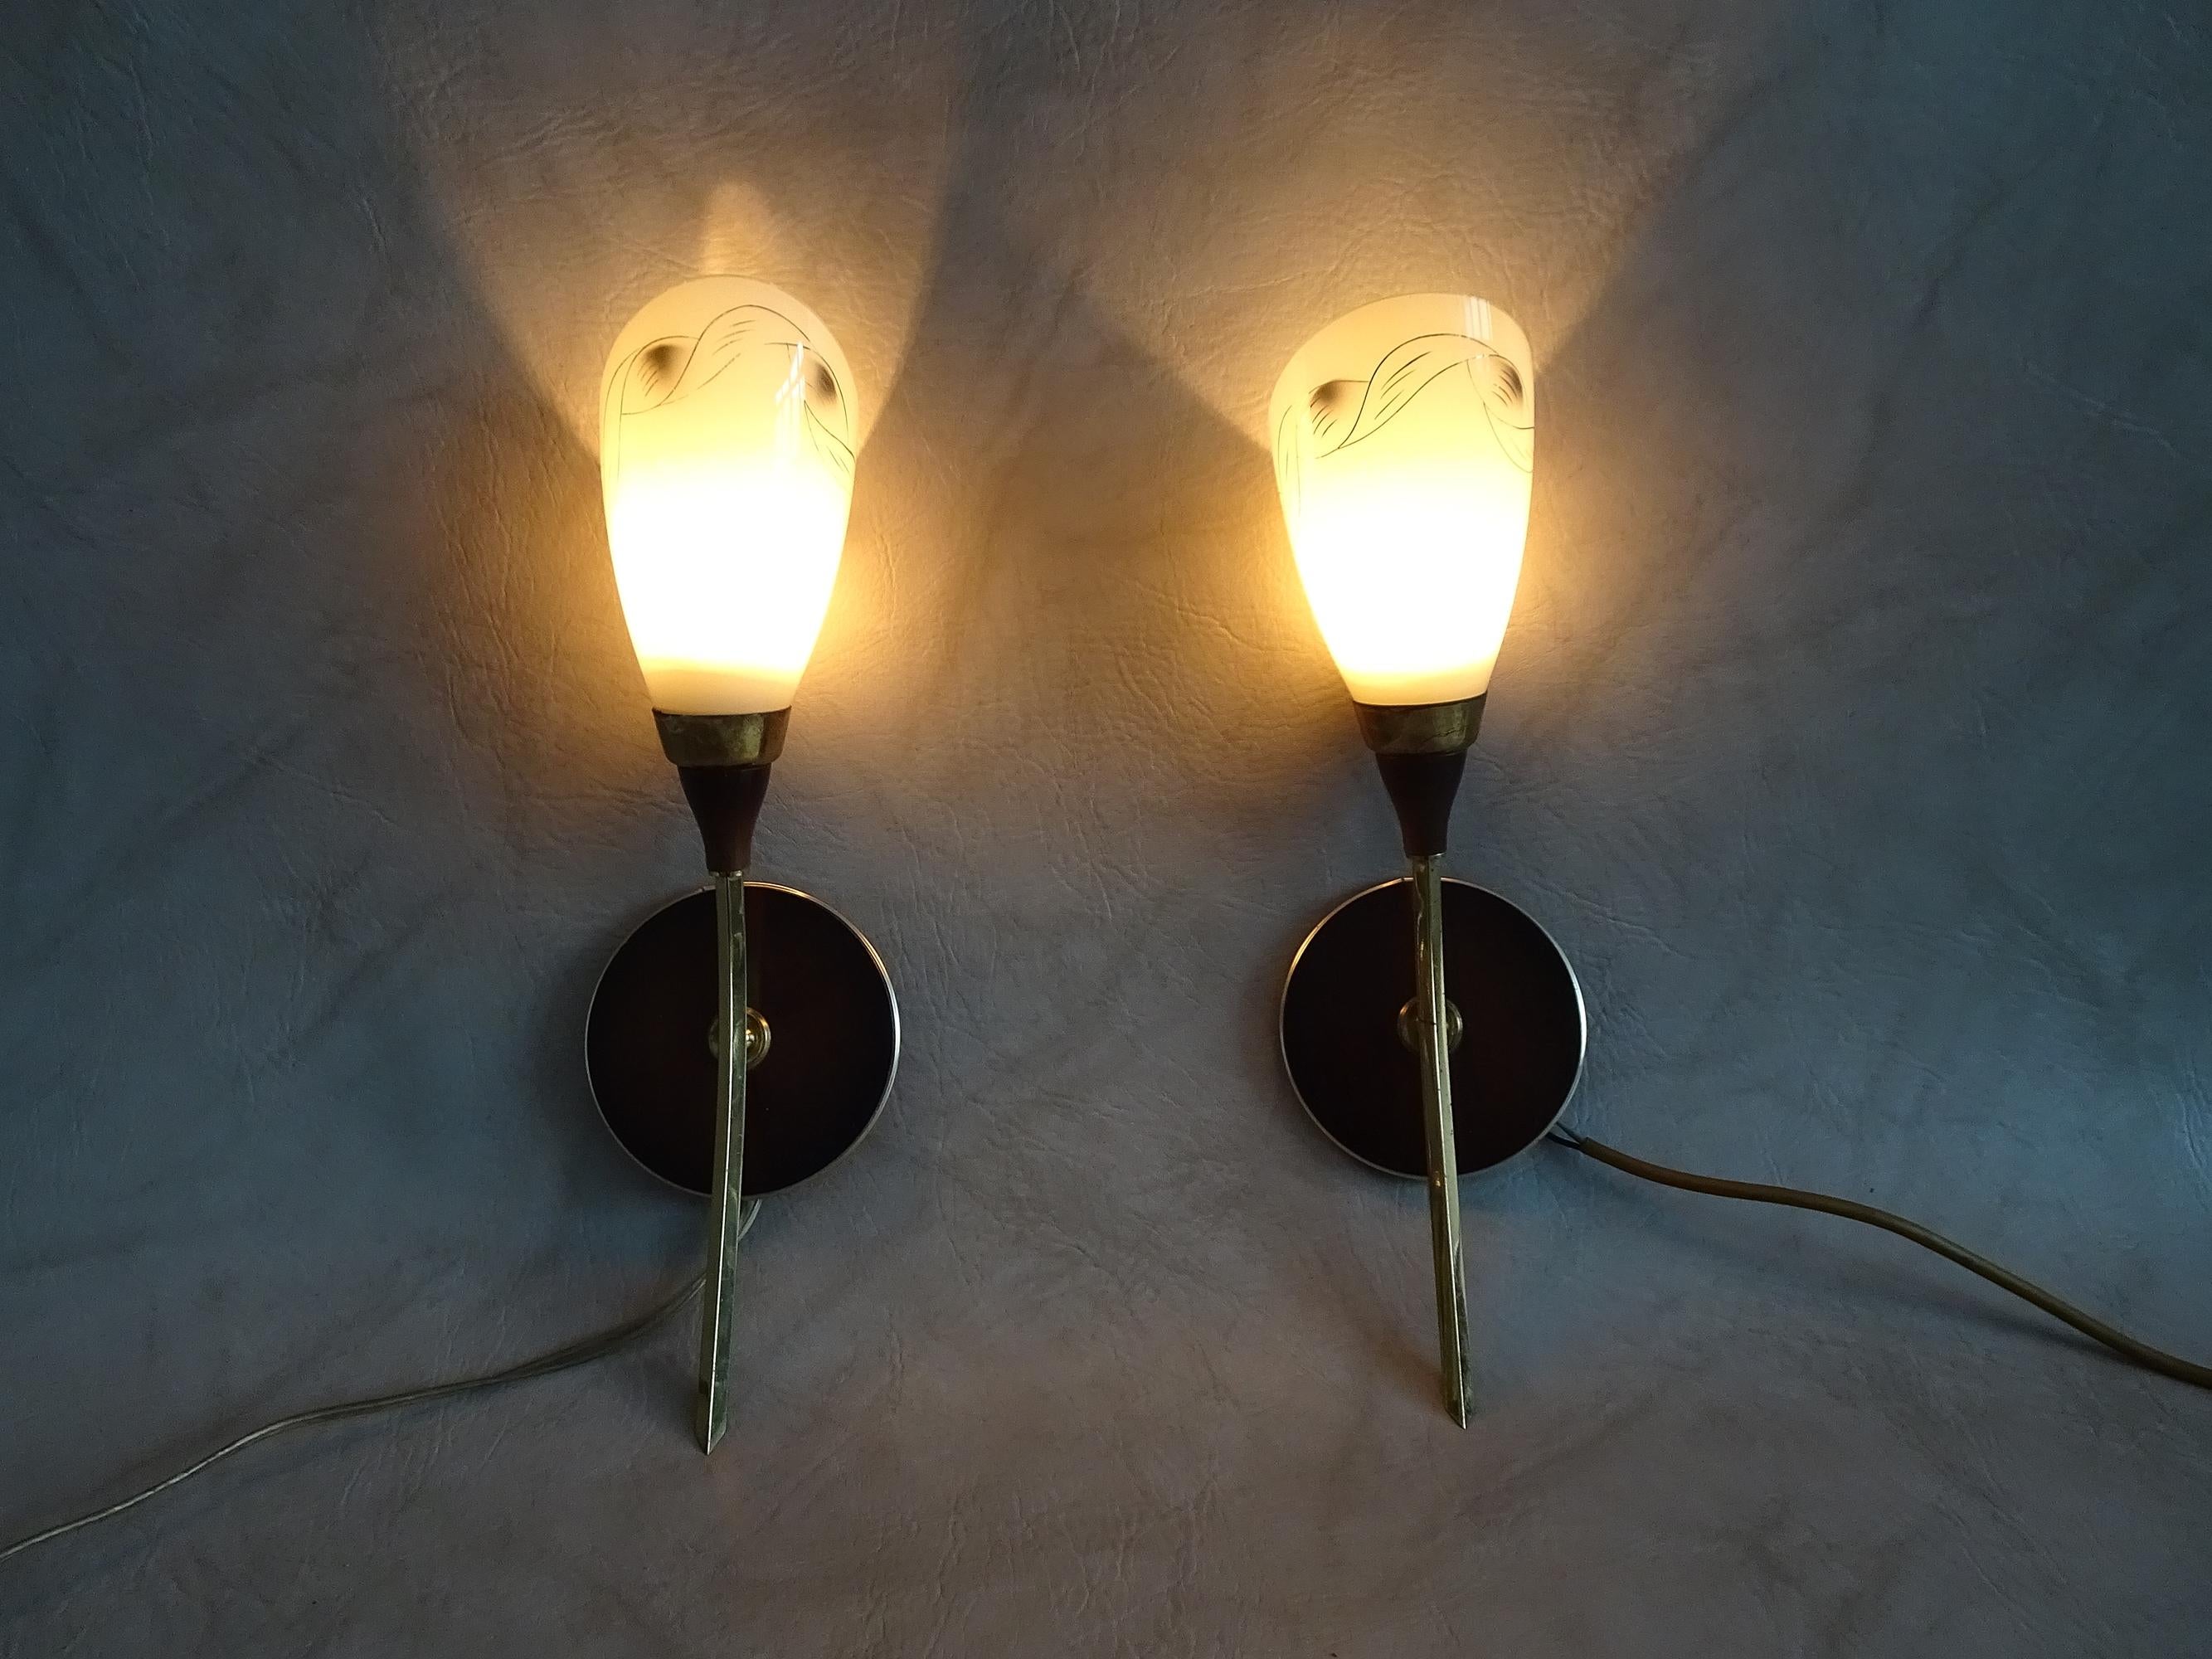 Pair of midcentury sconces, Germany, 1950s.
Wood and brass details.





Art.-Nr. 0449.